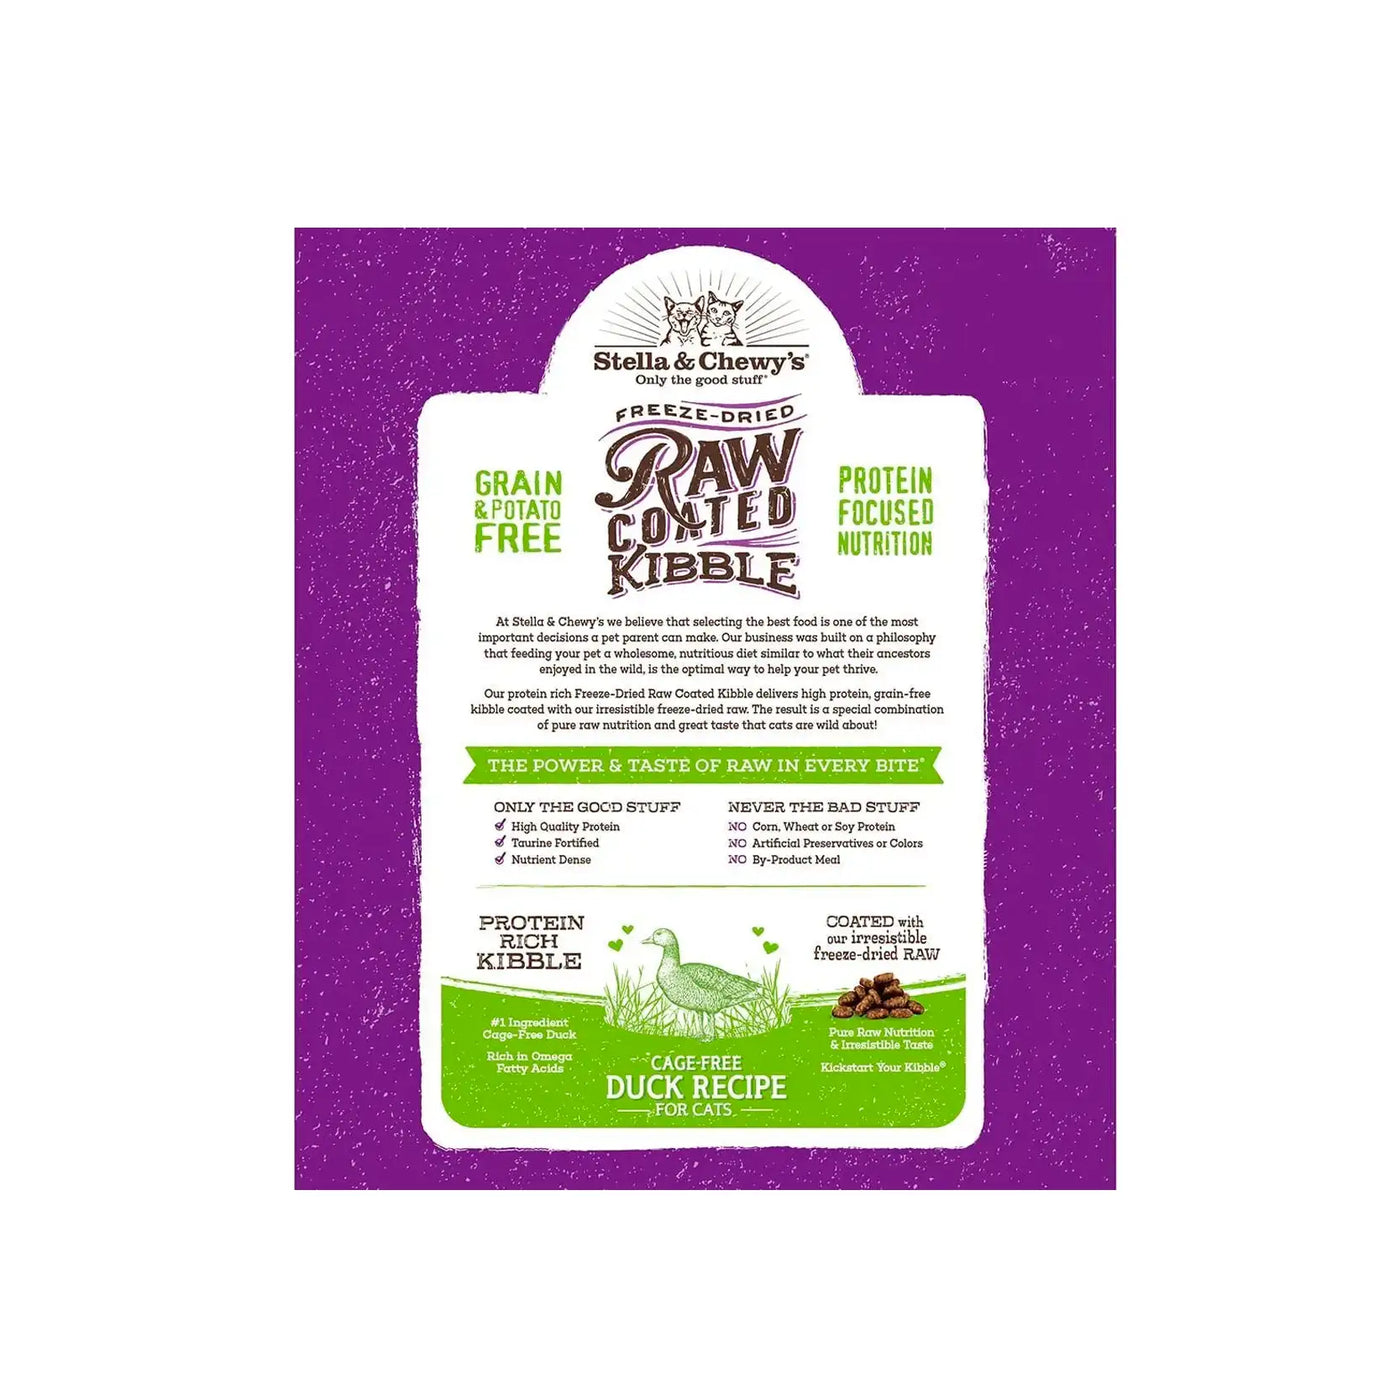 Stella & Chewy's - Freeze Dried Raw Coated Kibble for Cats (Cage-Free Duck Recipe)